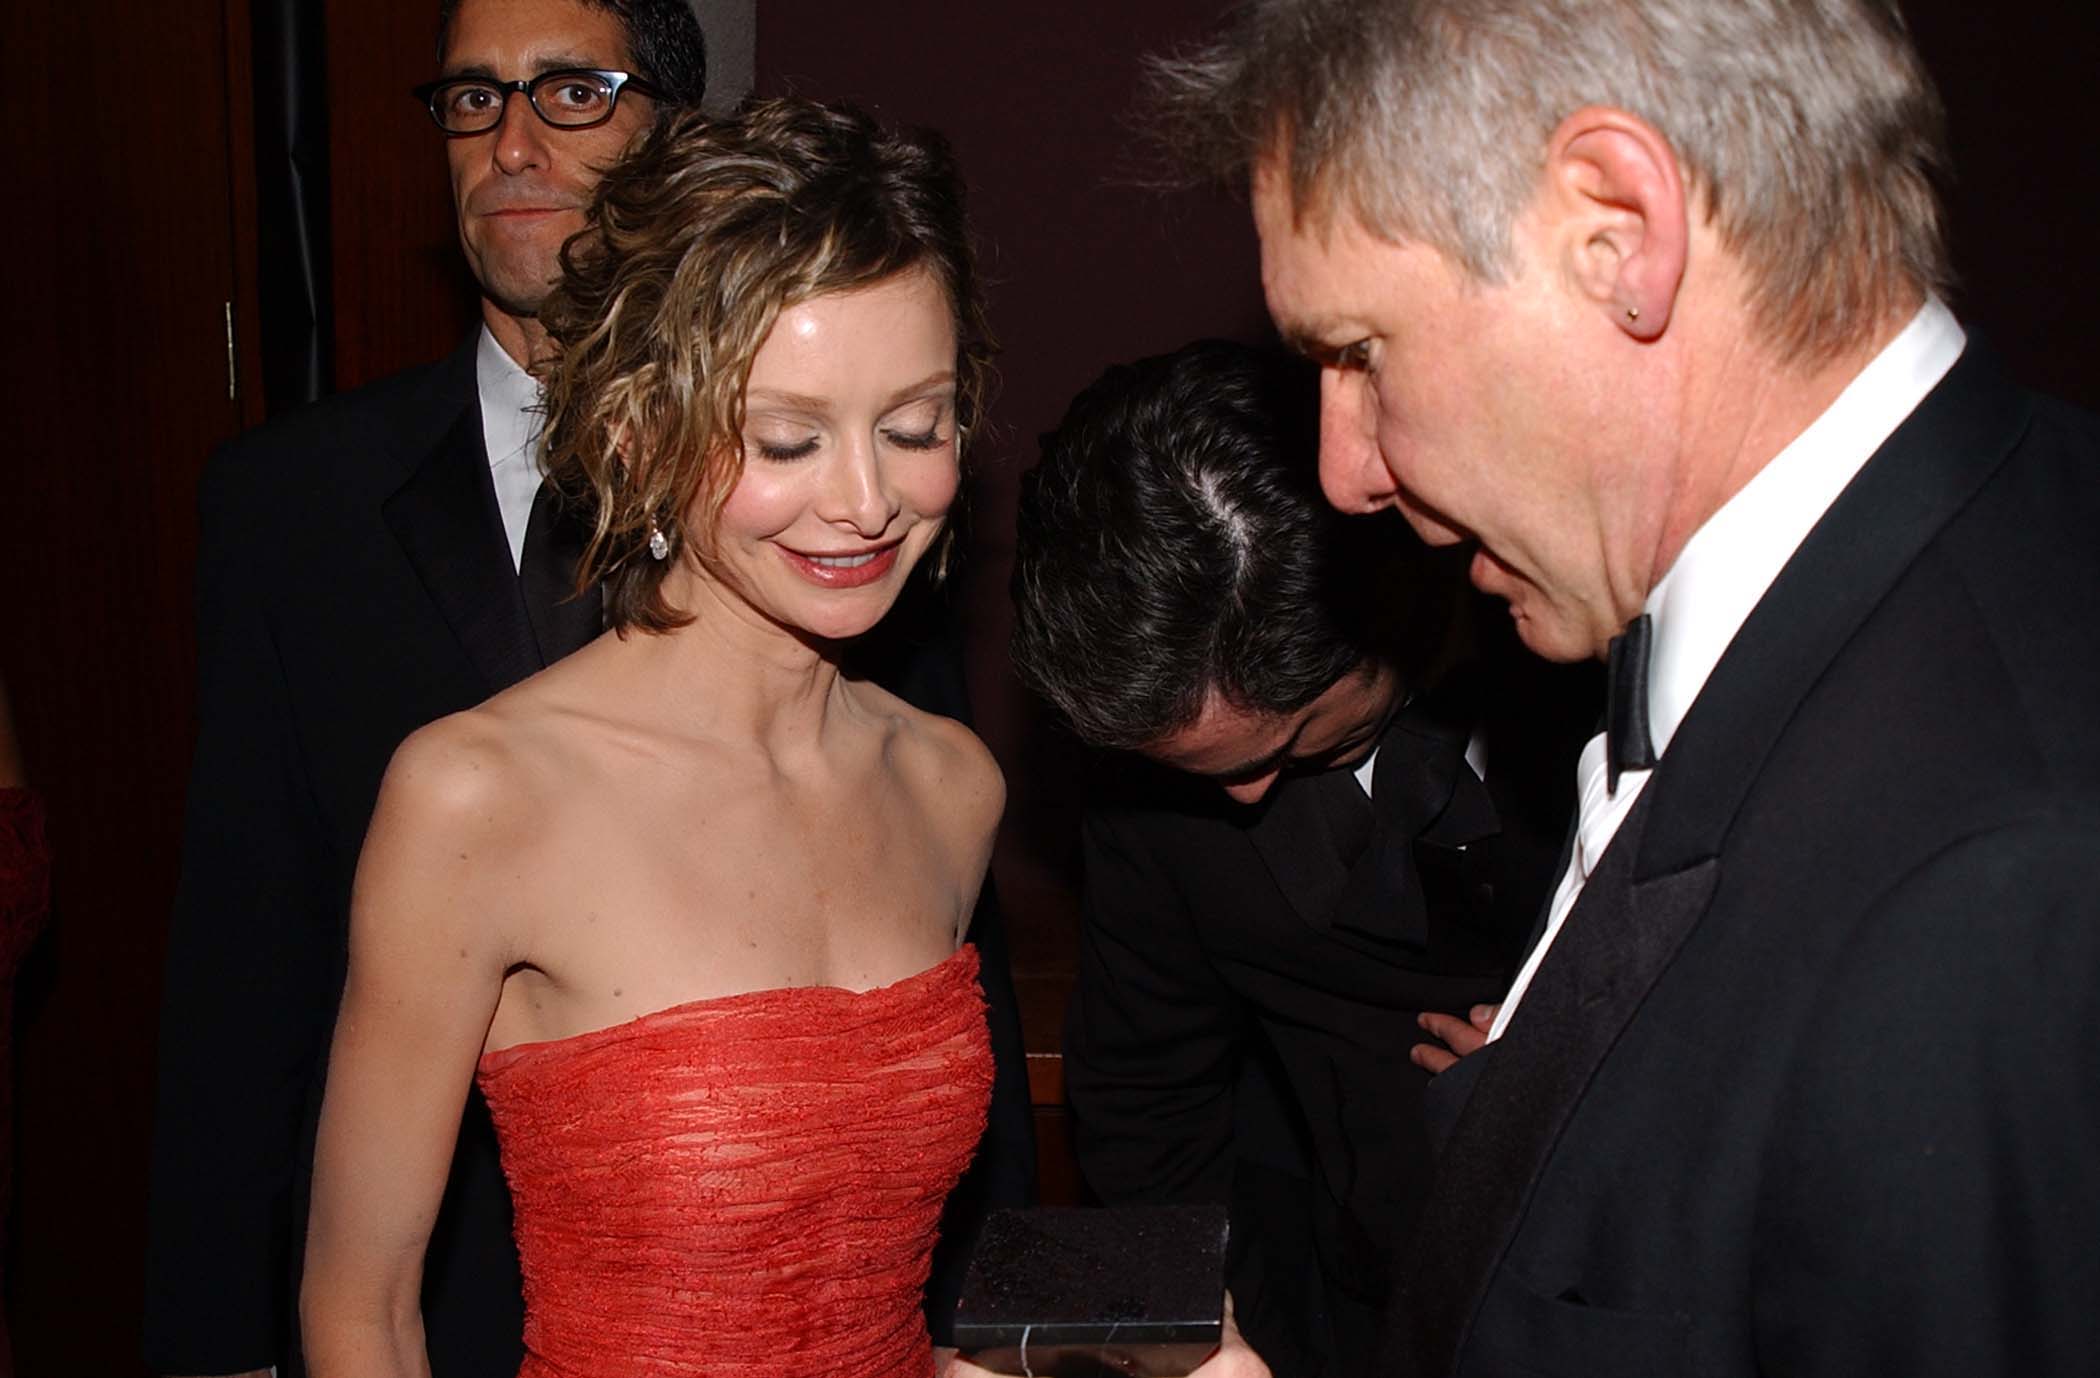 Calista Flockhart and Harrison Ford in Beverly Hills, California, United States, 2002 | Source: Getty Images